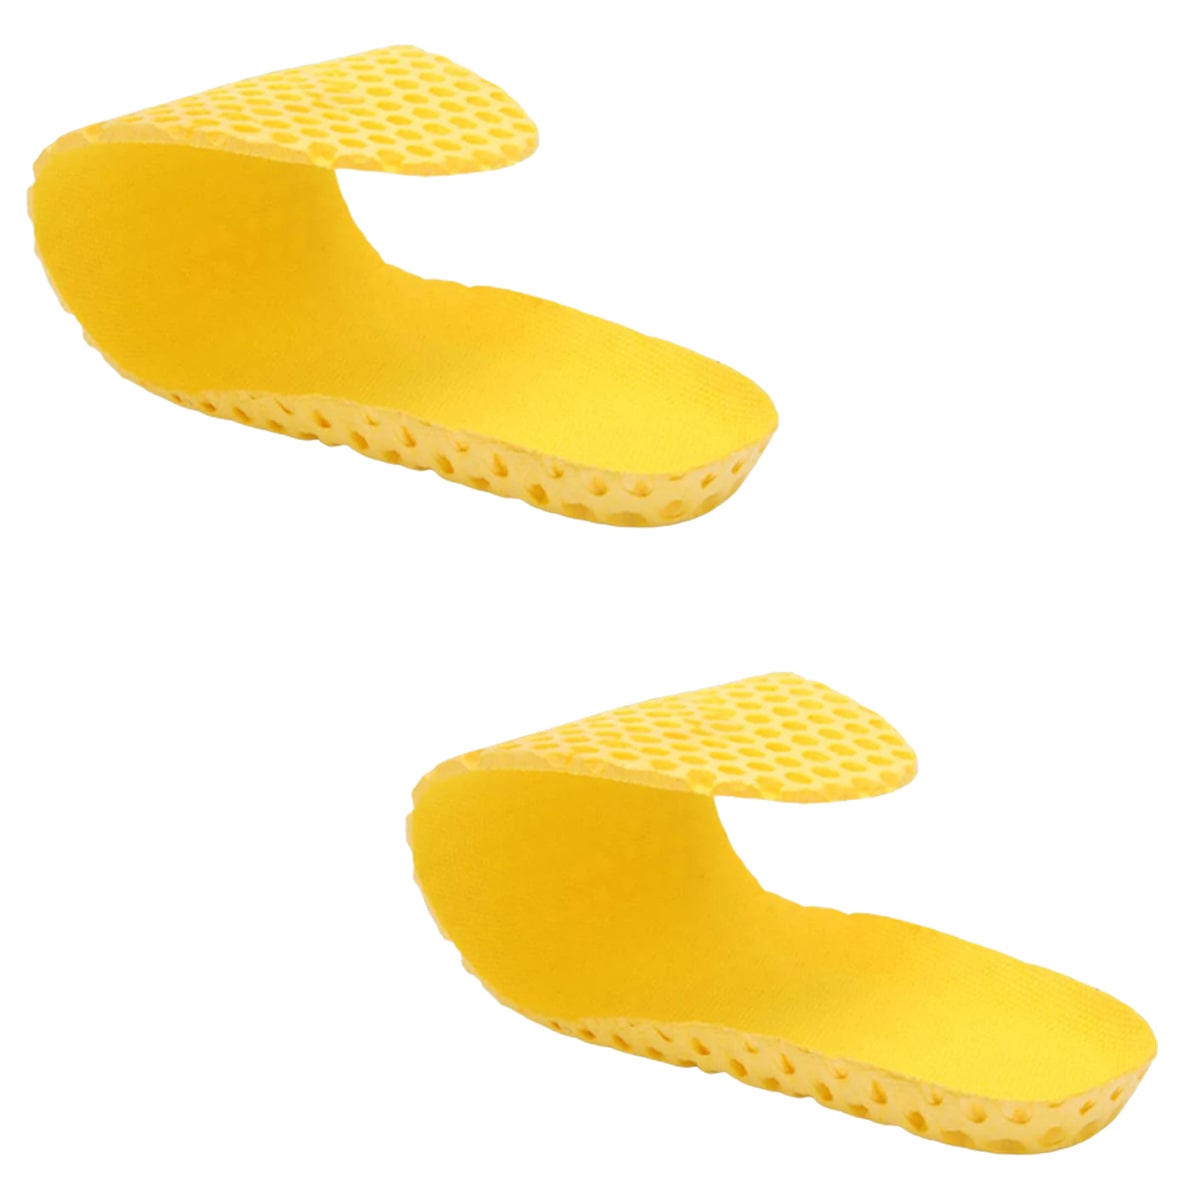 2 replacement insoles for barefoot shoes